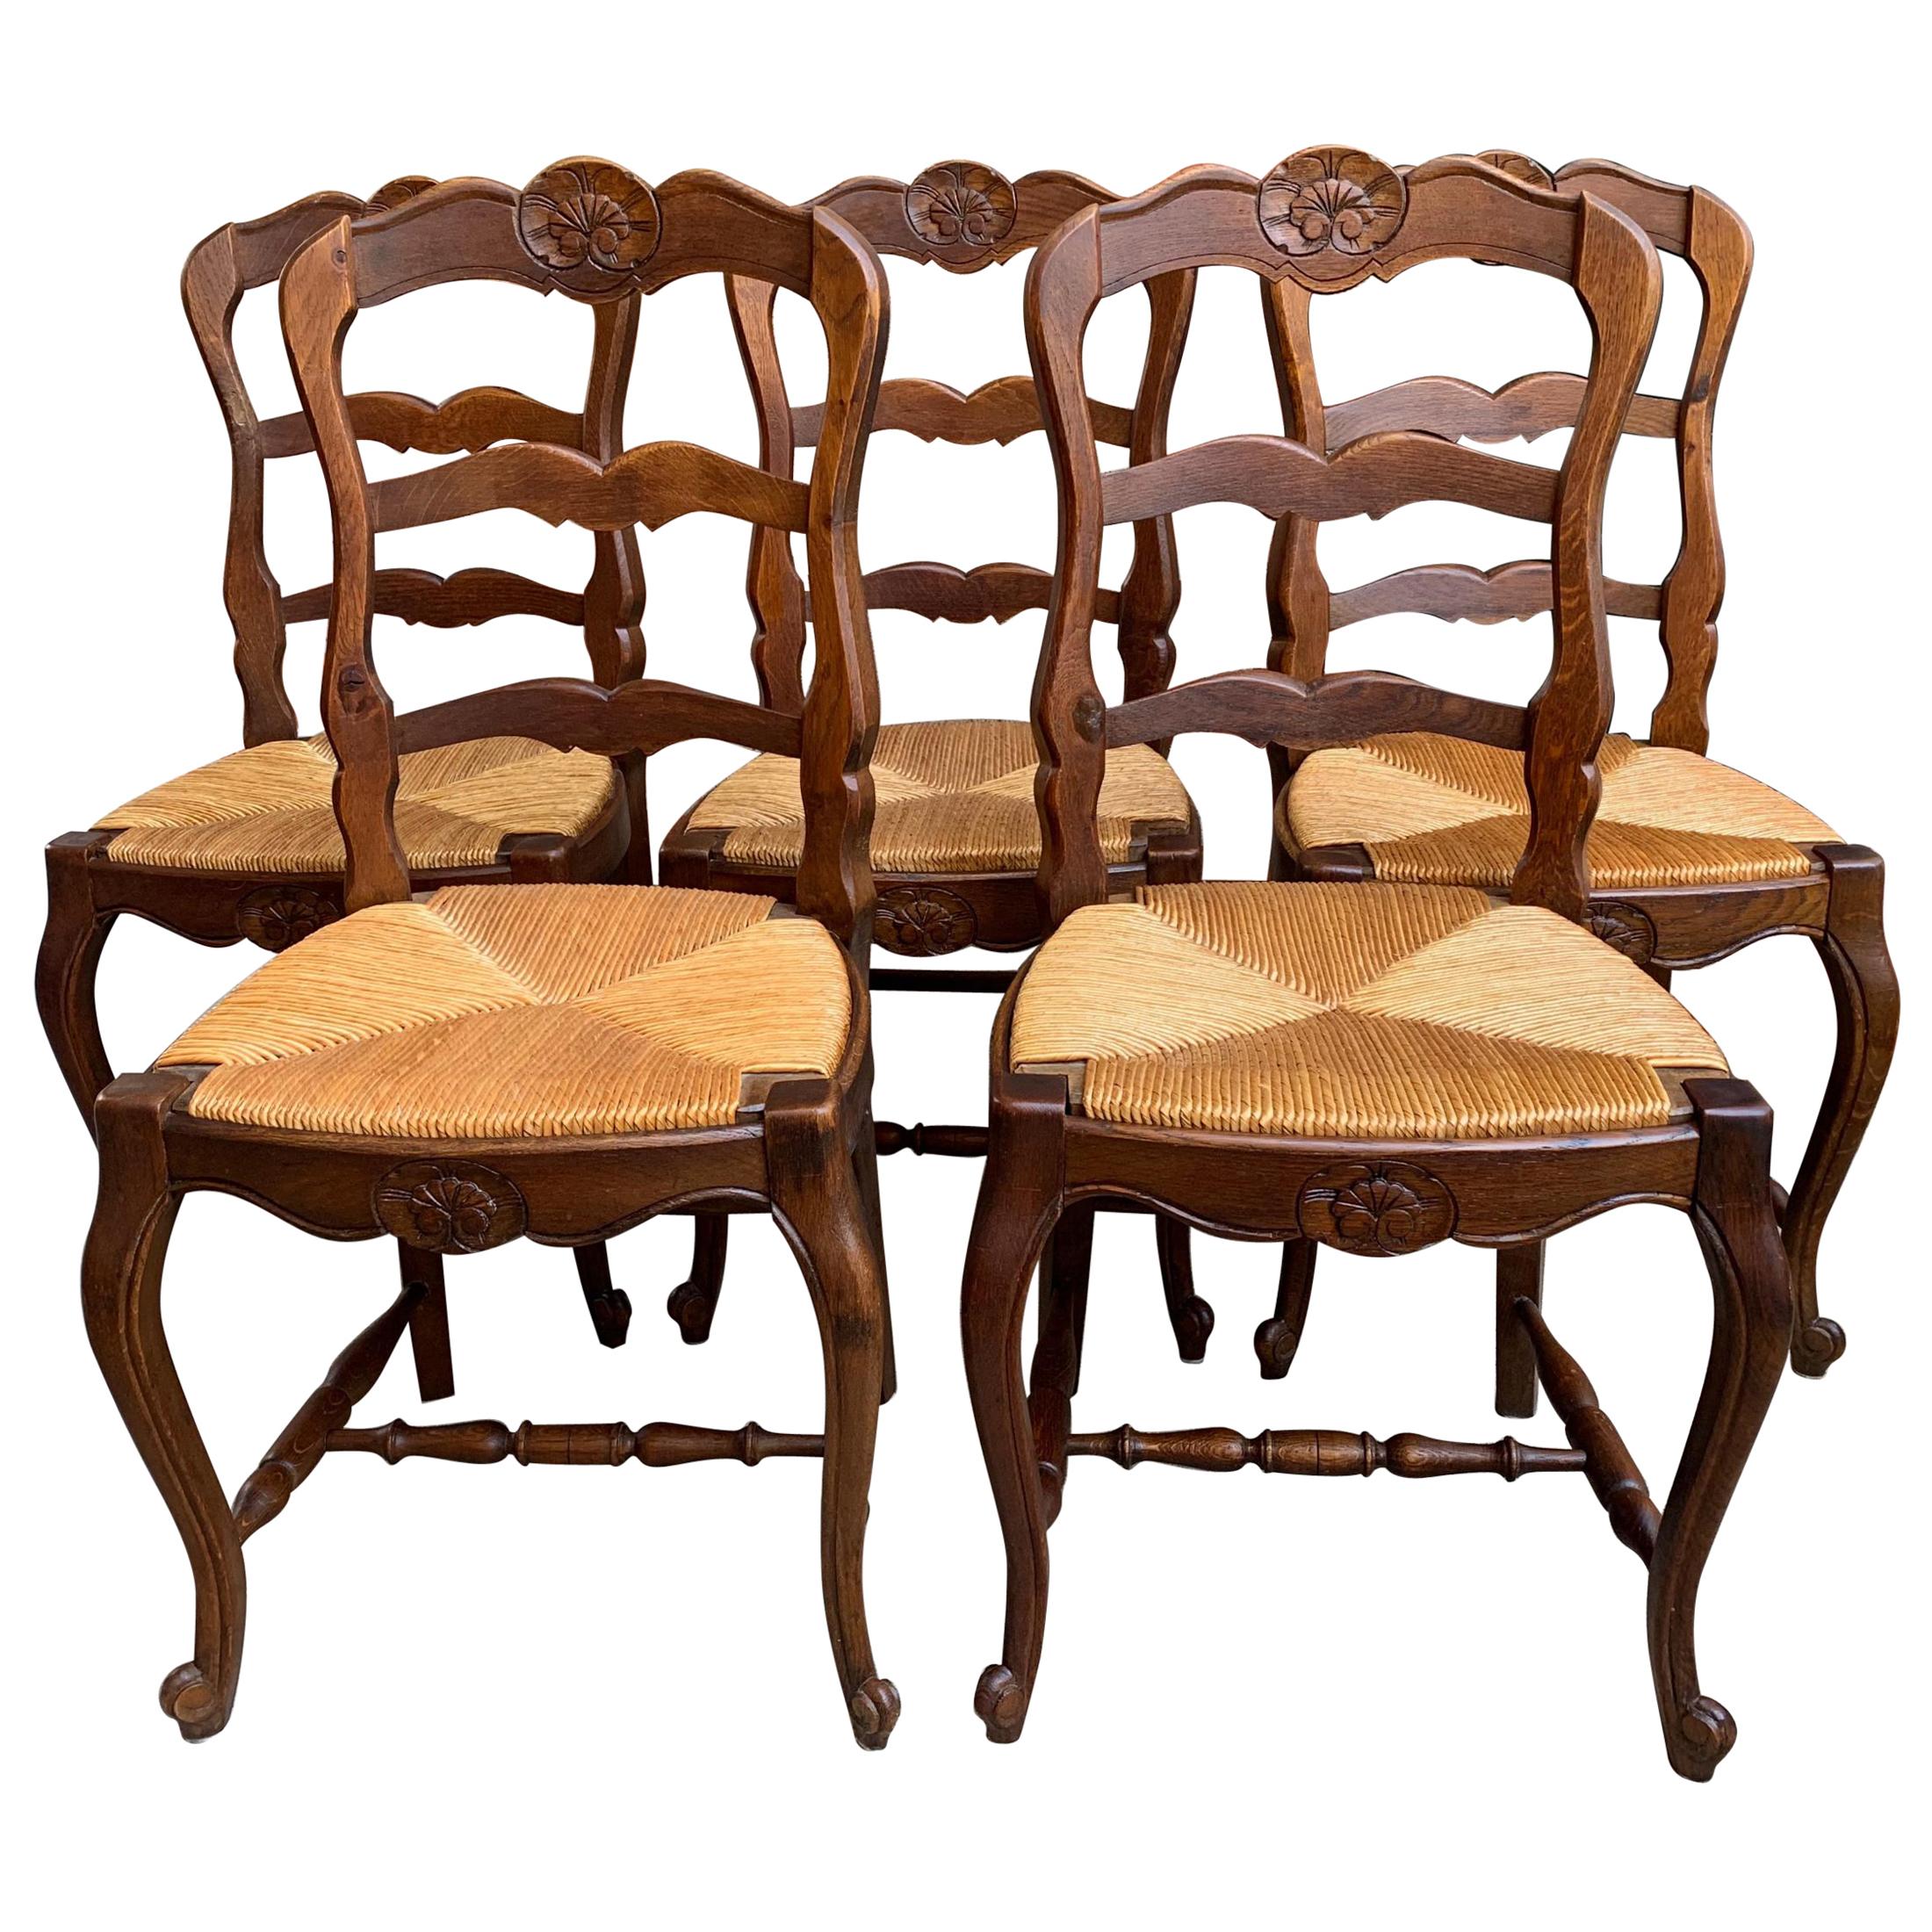 Set of 5 Antique French Country Carved Oak Ladder Back Dining Chair Rush Seat